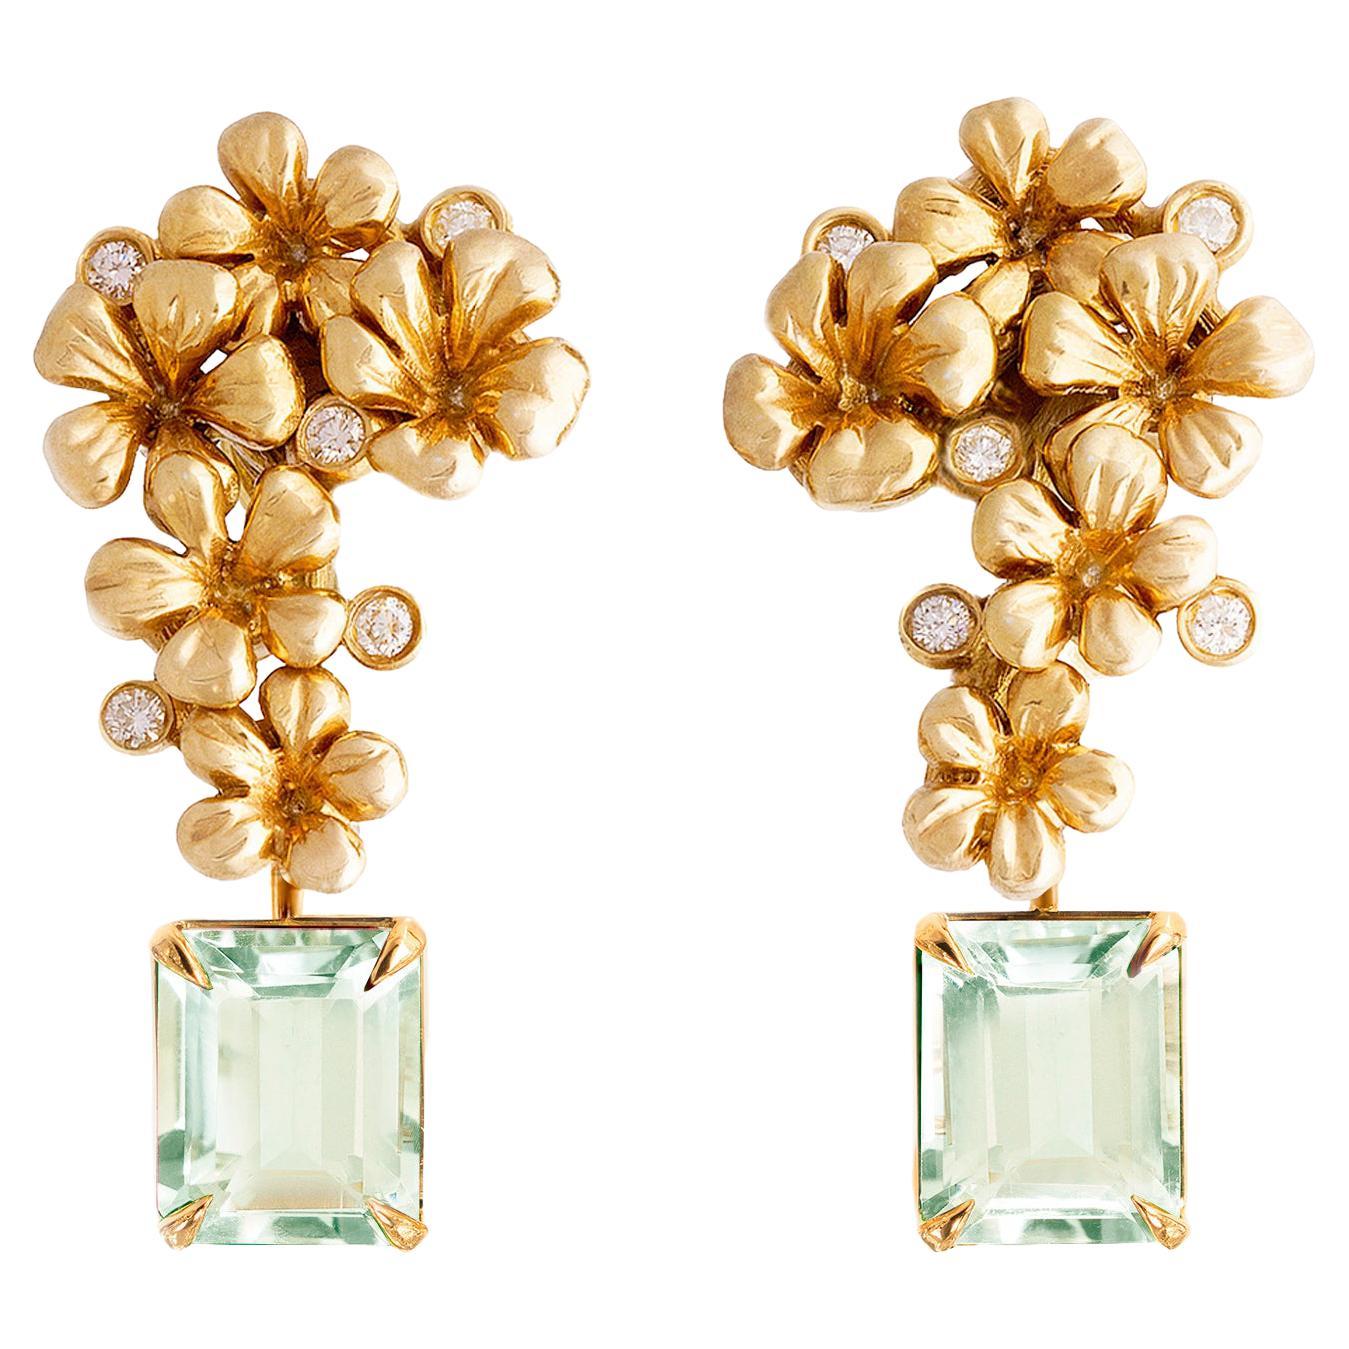 Yellow Gold Contemporary Floral Stud Earrings with Diamonds and Green Quartzes